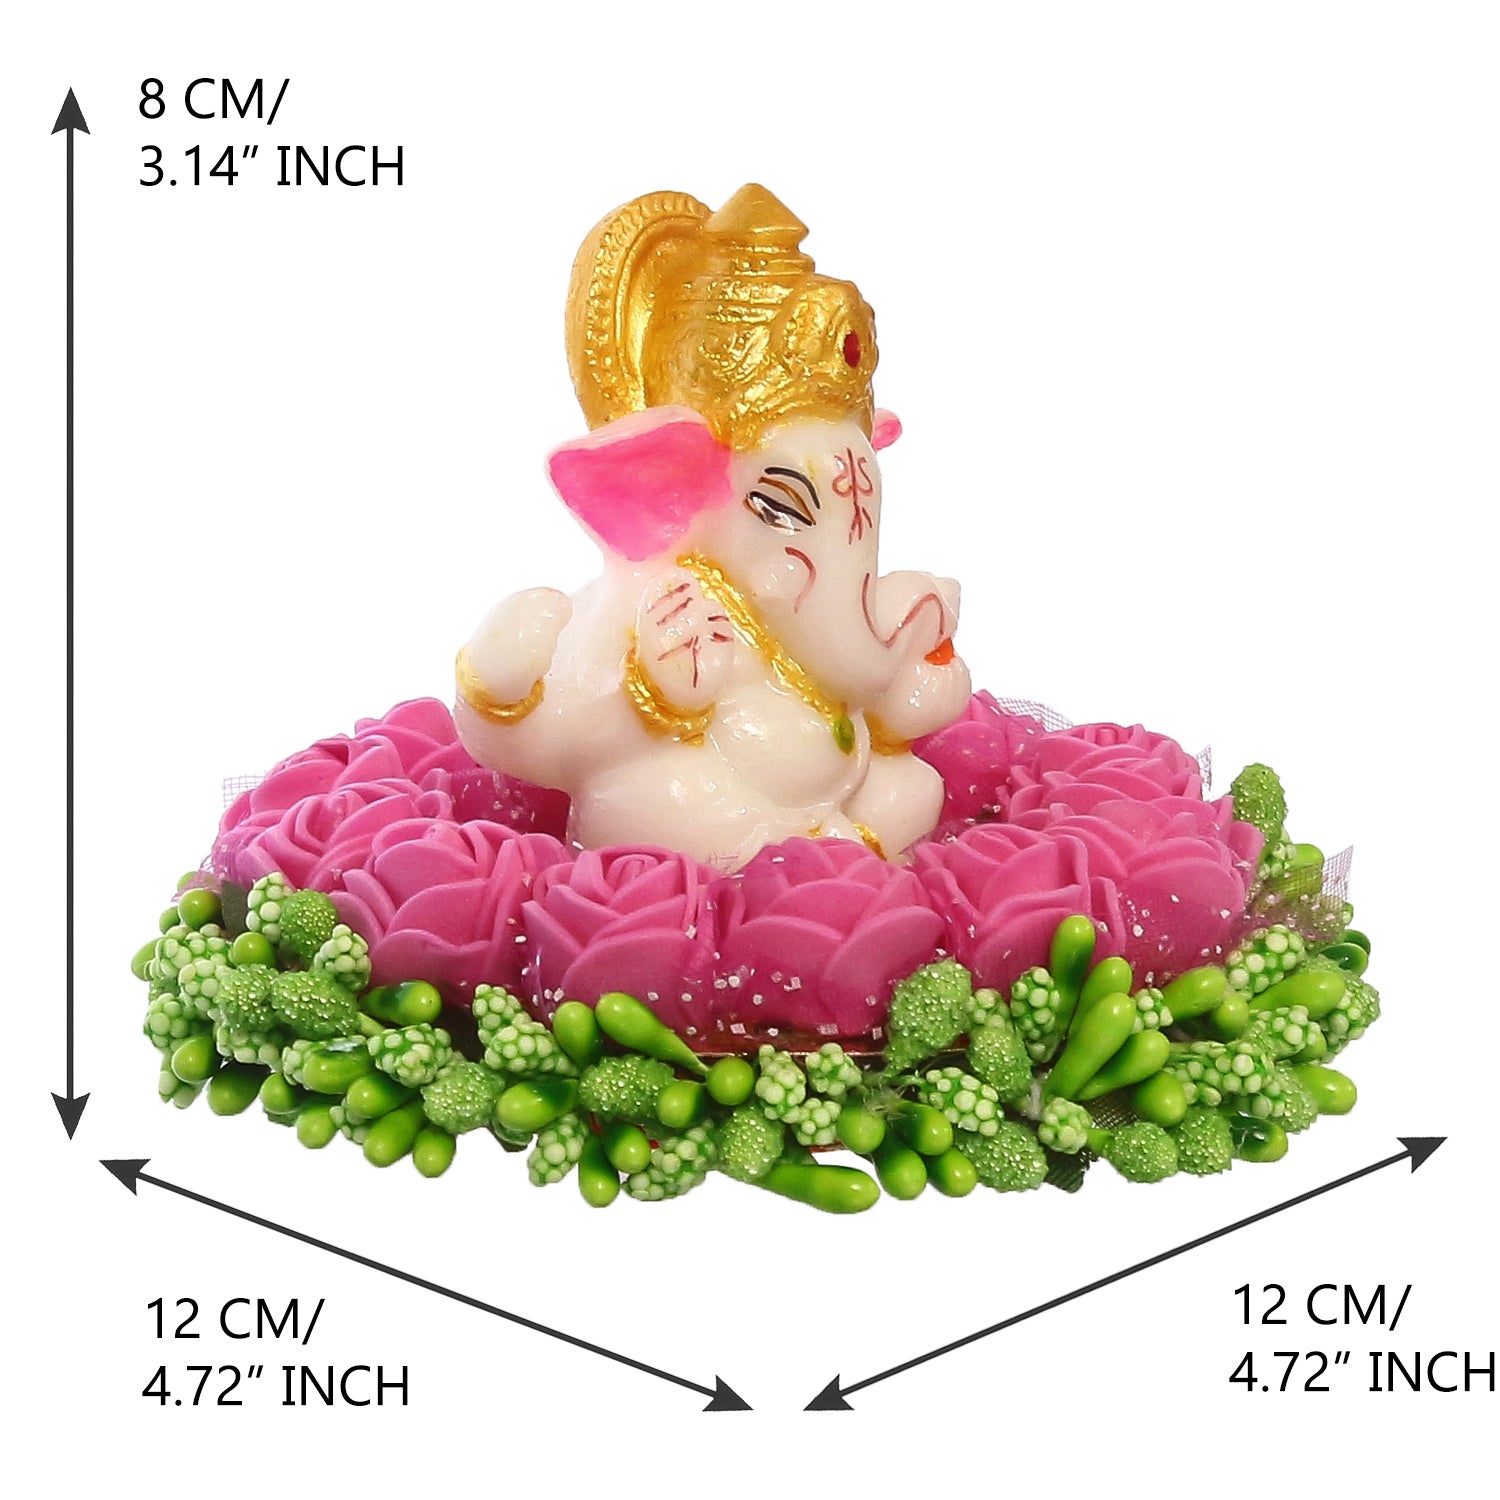 Lord Ganesha Idol On Decorative Handcrafted Pink Flowers Plate 3